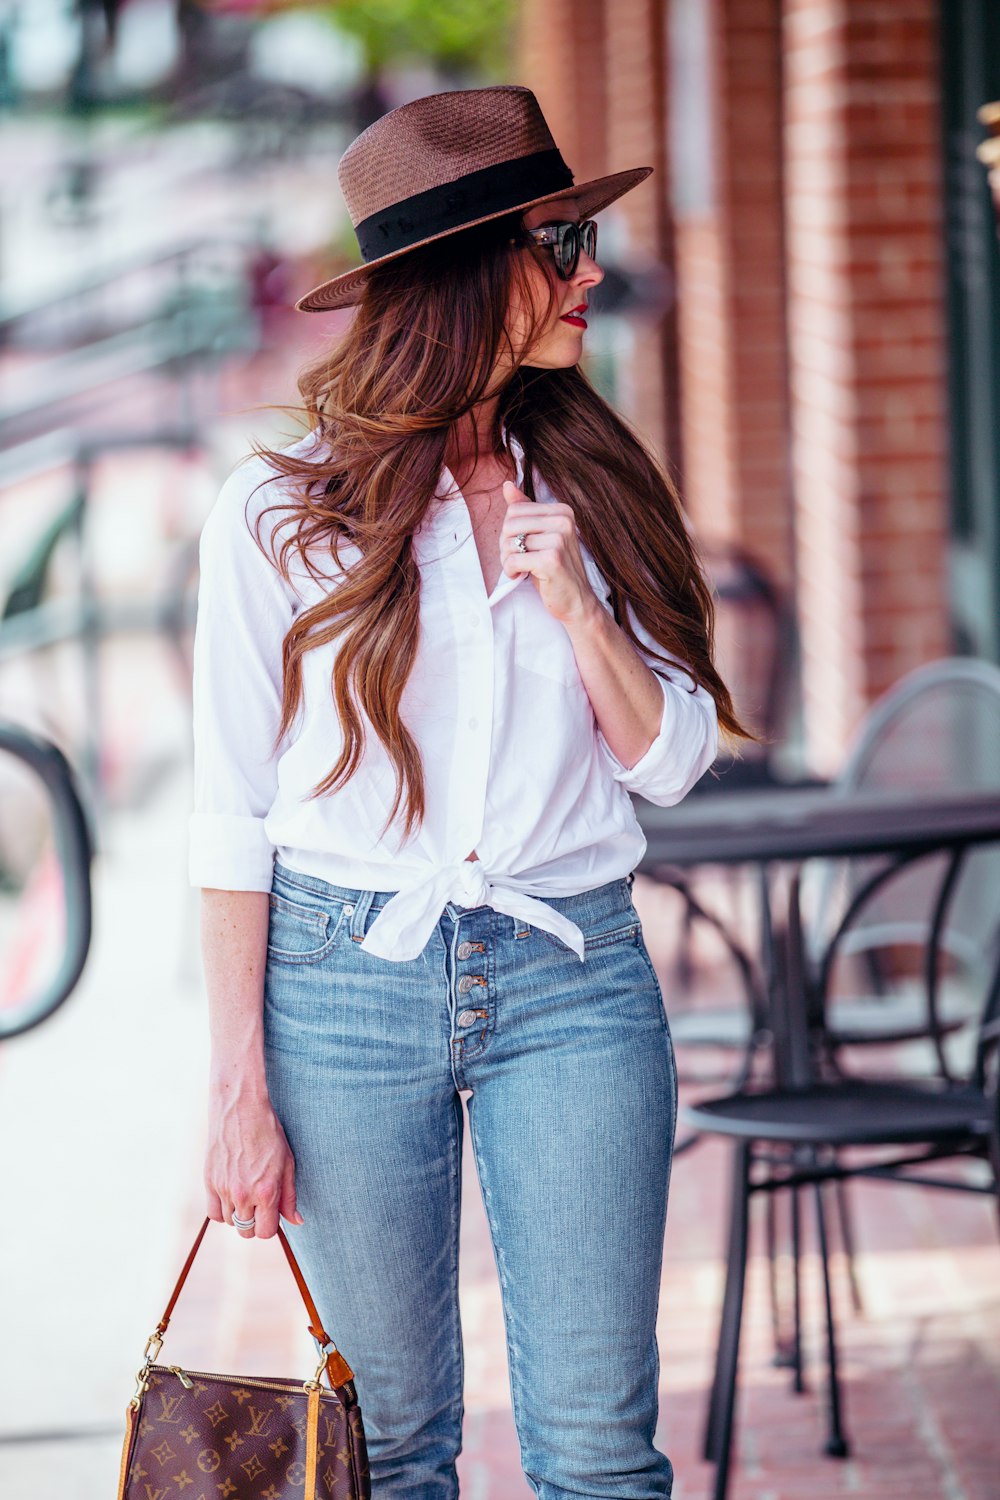 women's white dress shirt and blue jeans